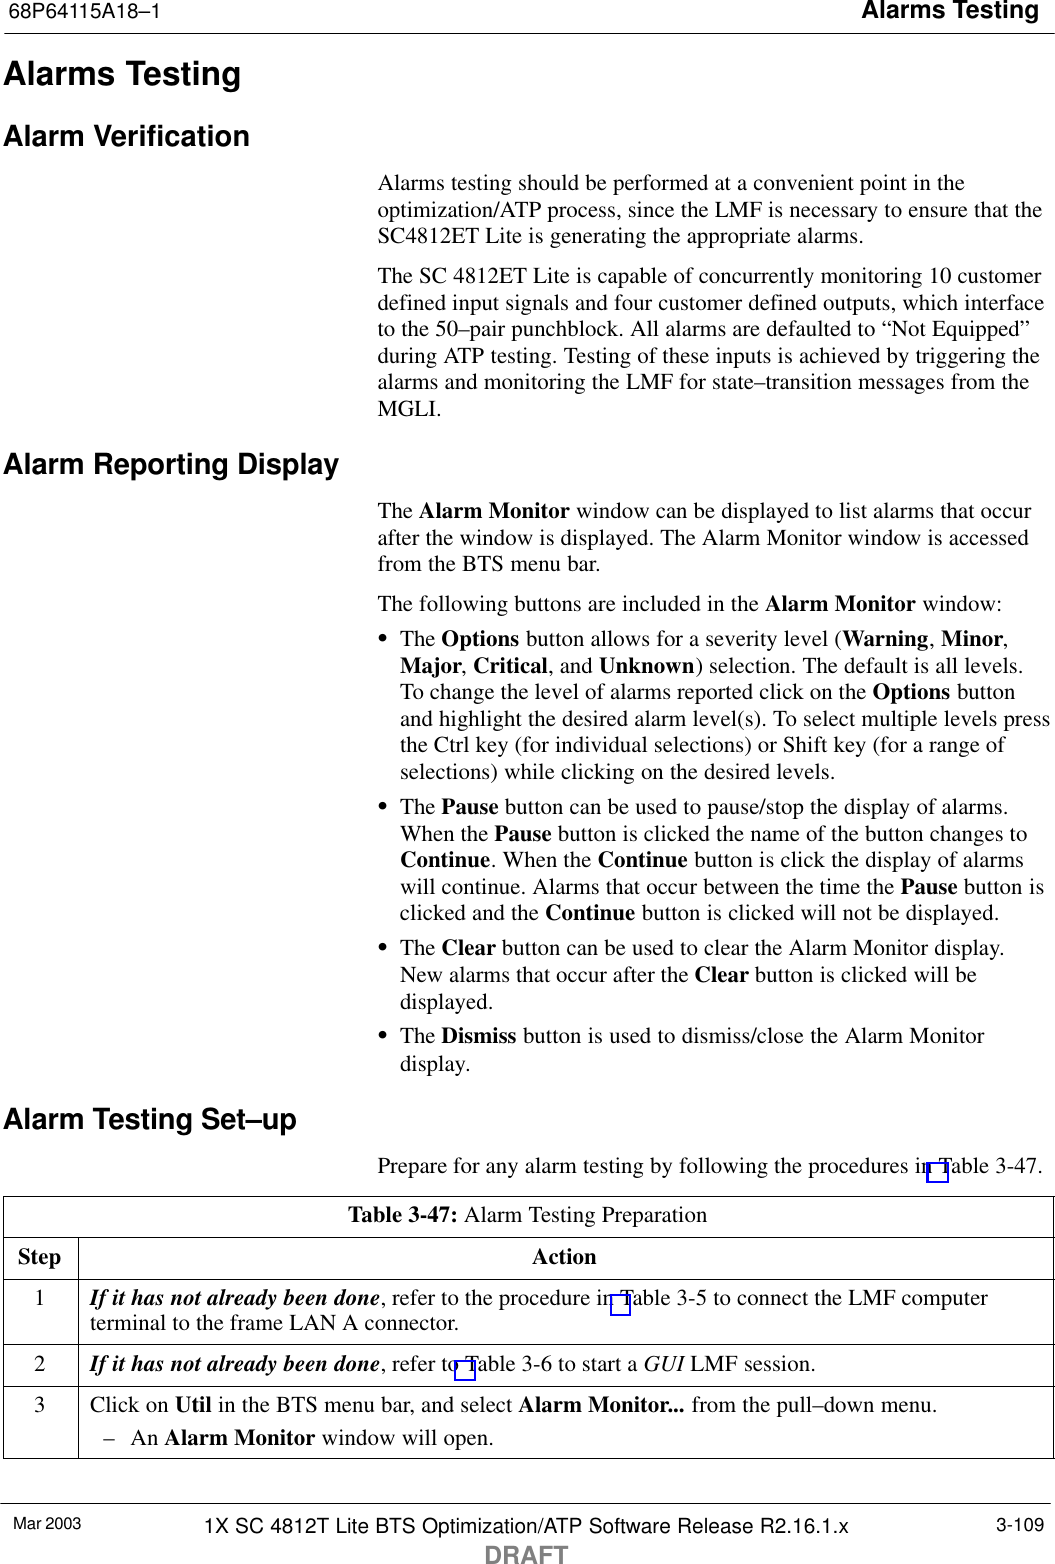 Alarms Testing68P64115A18–1Mar 2003 1X SC 4812T Lite BTS Optimization/ATP Software Release R2.16.1.xDRAFT3-109Alarms TestingAlarm VerificationAlarms testing should be performed at a convenient point in theoptimization/ATP process, since the LMF is necessary to ensure that theSC4812ET Lite is generating the appropriate alarms.The SC 4812ET Lite is capable of concurrently monitoring 10 customerdefined input signals and four customer defined outputs, which interfaceto the 50–pair punchblock. All alarms are defaulted to “Not Equipped”during ATP testing. Testing of these inputs is achieved by triggering thealarms and monitoring the LMF for state–transition messages from theMGLI.Alarm Reporting DisplayThe Alarm Monitor window can be displayed to list alarms that occurafter the window is displayed. The Alarm Monitor window is accessedfrom the BTS menu bar.The following buttons are included in the Alarm Monitor window:SThe Options button allows for a severity level (Warning, Minor,Major, Critical, and Unknown) selection. The default is all levels.To change the level of alarms reported click on the Options buttonand highlight the desired alarm level(s). To select multiple levels pressthe Ctrl key (for individual selections) or Shift key (for a range ofselections) while clicking on the desired levels.SThe Pause button can be used to pause/stop the display of alarms.When the Pause button is clicked the name of the button changes toContinue. When the Continue button is click the display of alarmswill continue. Alarms that occur between the time the Pause button isclicked and the Continue button is clicked will not be displayed.SThe Clear button can be used to clear the Alarm Monitor display.New alarms that occur after the Clear button is clicked will bedisplayed.SThe Dismiss button is used to dismiss/close the Alarm Monitordisplay.Alarm Testing Set–upPrepare for any alarm testing by following the procedures in Table 3-47.Table 3-47: Alarm Testing PreparationStep Action1If it has not already been done, refer to the procedure in Table 3-5 to connect the LMF computerterminal to the frame LAN A connector.2If it has not already been done, refer to Table 3-6 to start a GUI LMF session.3Click on Util in the BTS menu bar, and select Alarm Monitor... from the pull–down menu.– An Alarm Monitor window will open. 